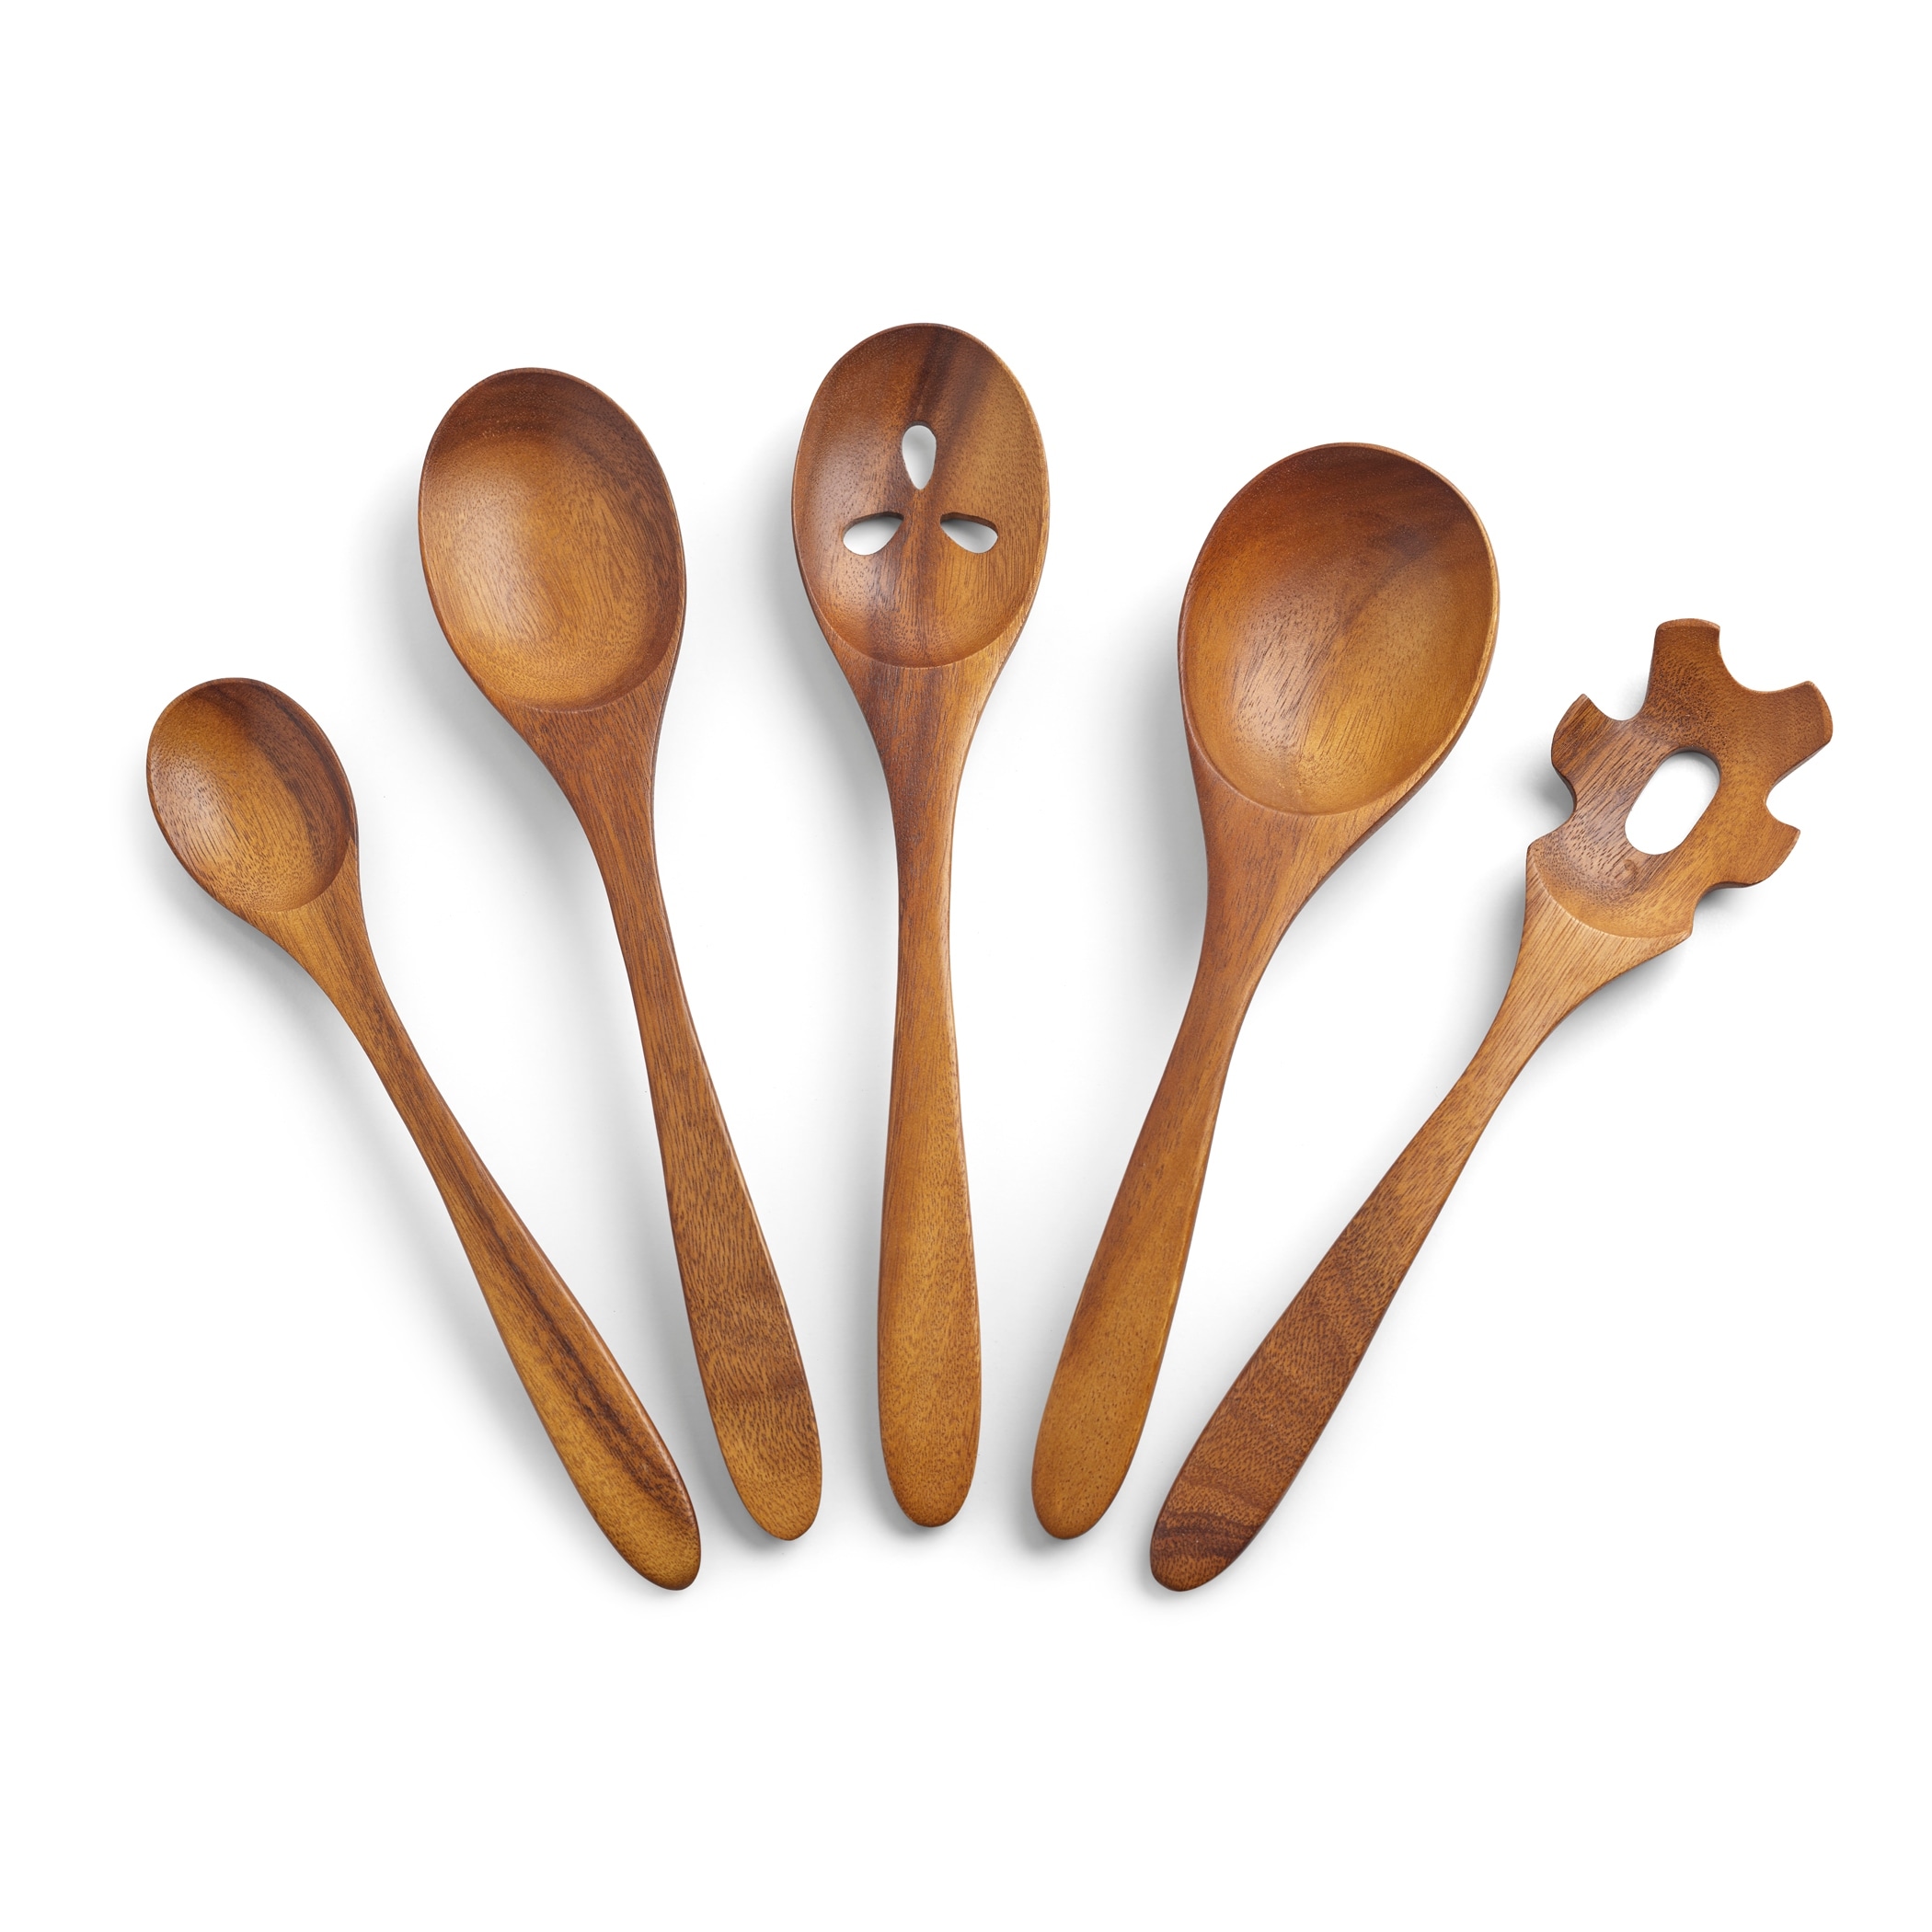 https://ak1.ostkcdn.com/images/products/is/images/direct/dda141625d7fb05a2f8b40fb9c3b4a5ed609298a/Nambe-Tulip-Wood-Kitchen-Tools-5-Piece-Set-Kitchen-Cooking-Utensils.jpg